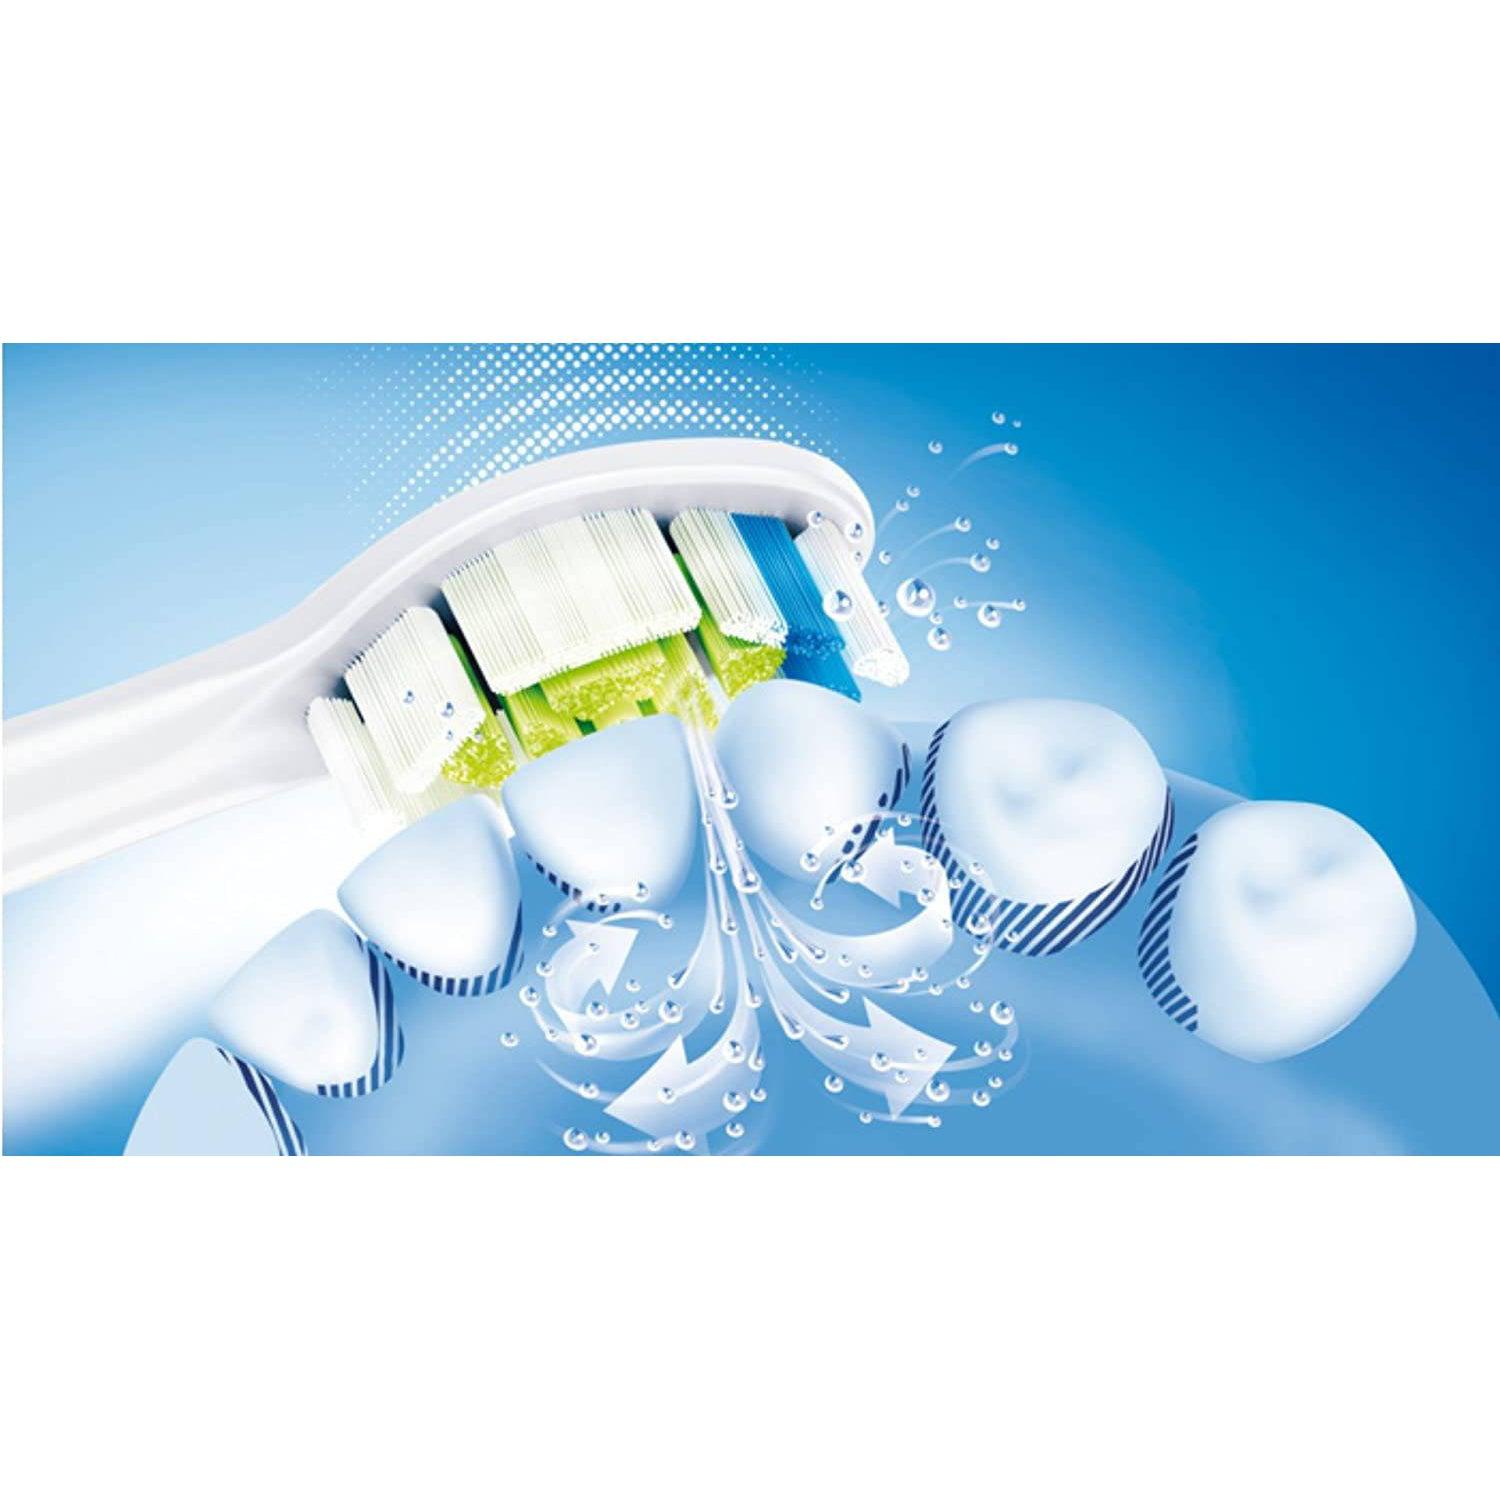 Philips HX6062/07 Sonicare DiamondClean toothbrush heads (White) Pack of 2 - Healthxpress.ie